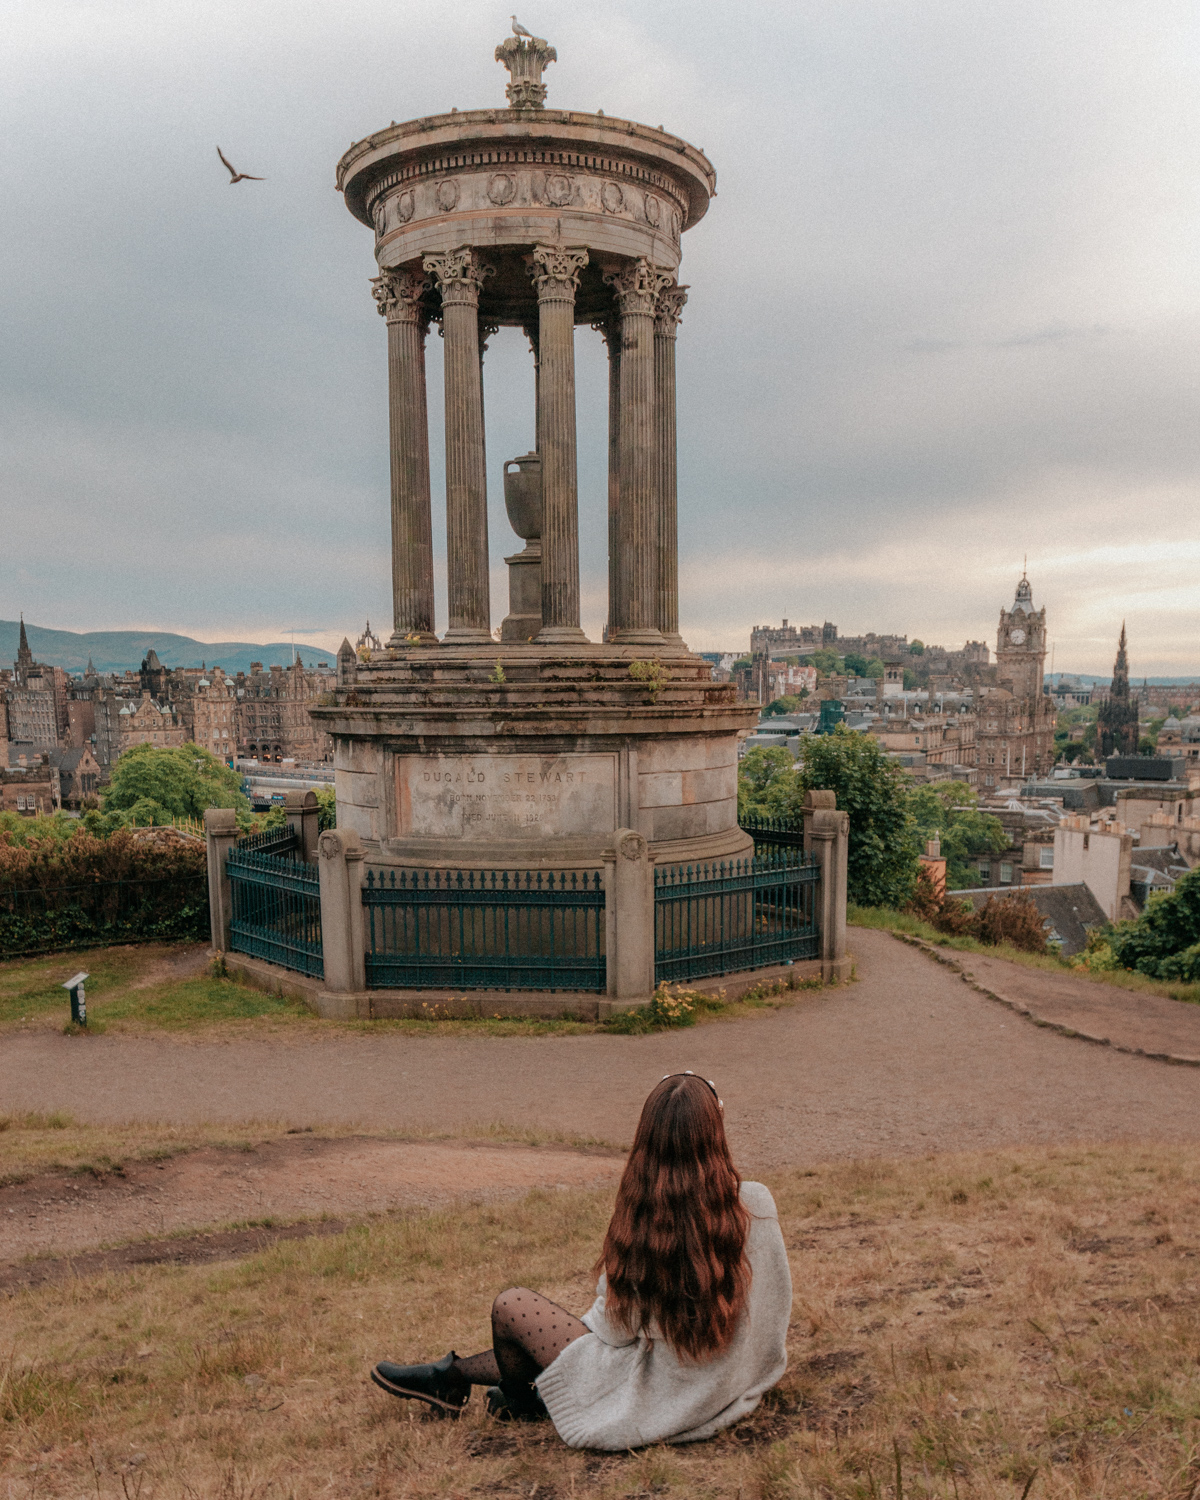 Girl sitting on slight hill in front of a monument with city skyline in background - Calton Hill, Edinburgh, Scotland